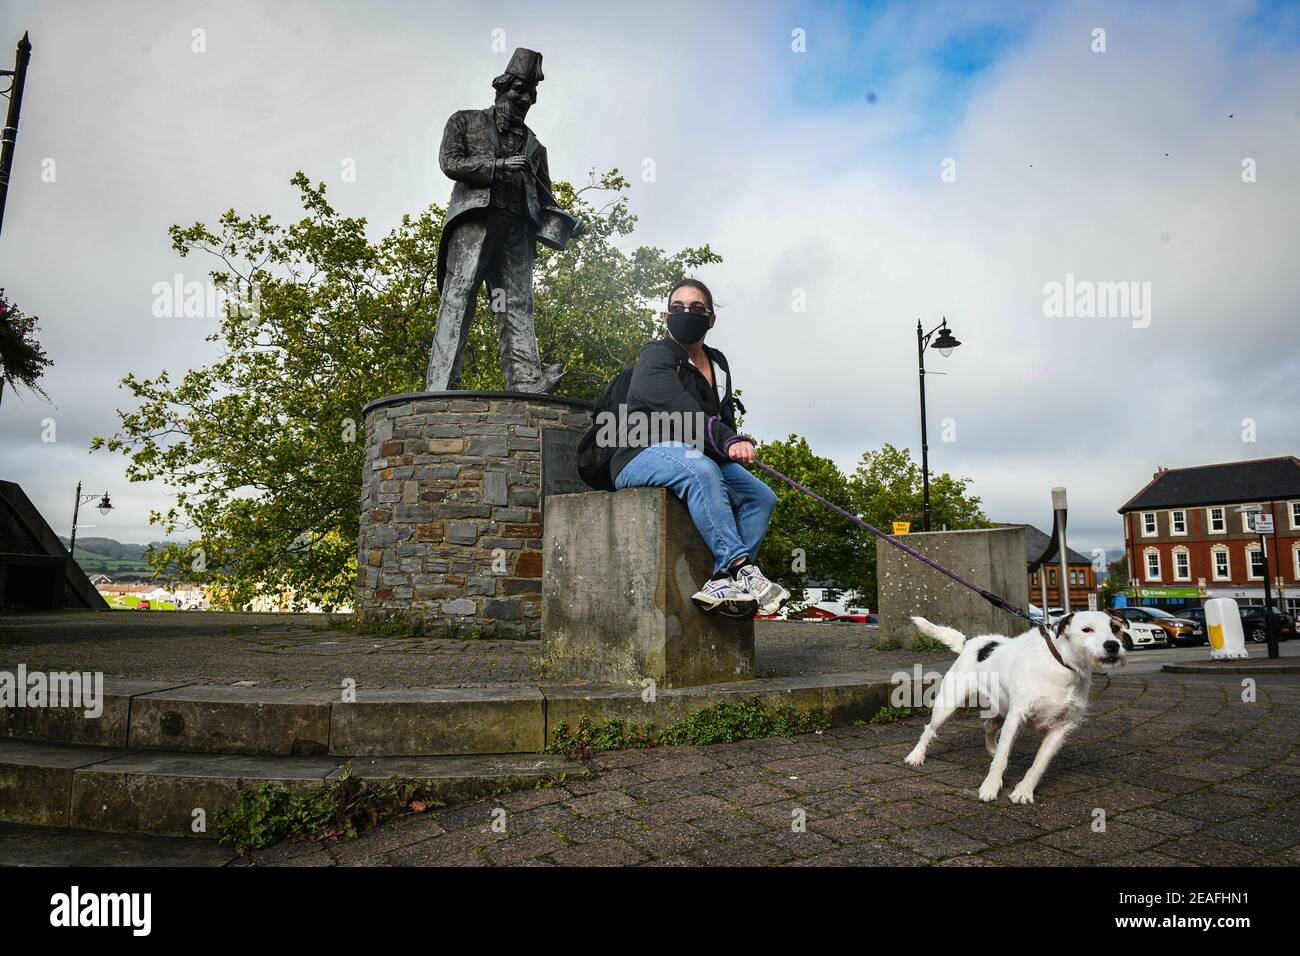 Caerphilly, Wales, UK. Resident, Claire Evans sits by the Tommy Cooper statue in the town of Caerphilly in south Wales, which has gone into lockdown along with it's wider borough area, after what is being described as a rapid increase in coronavirus cases. The Welsh government announced that from 6pm on Tuesday people will not be able to leave or enter the area without good reason, along with other restrictive measures. Stock Photo